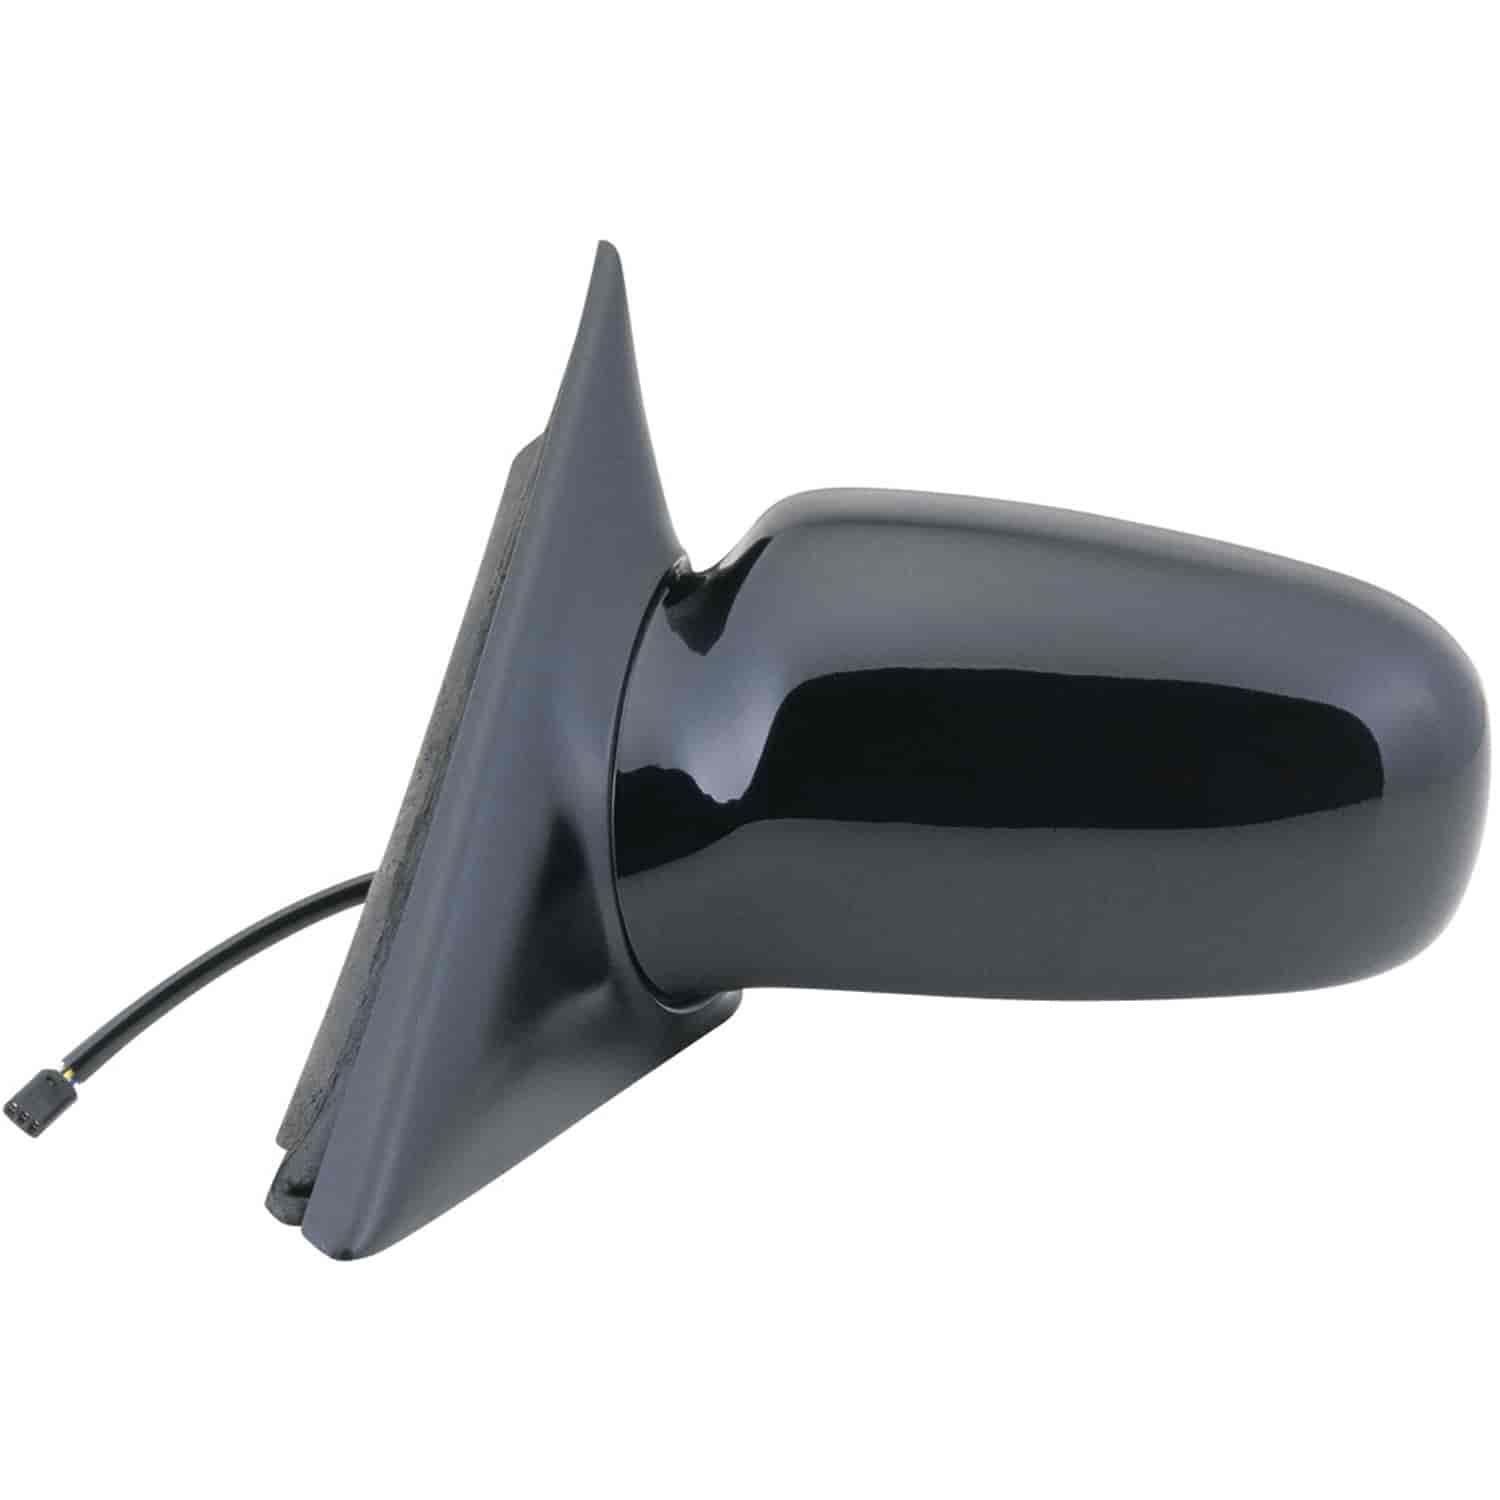 OEM Style Replacement mirror for 97-03 Chevy Malibu